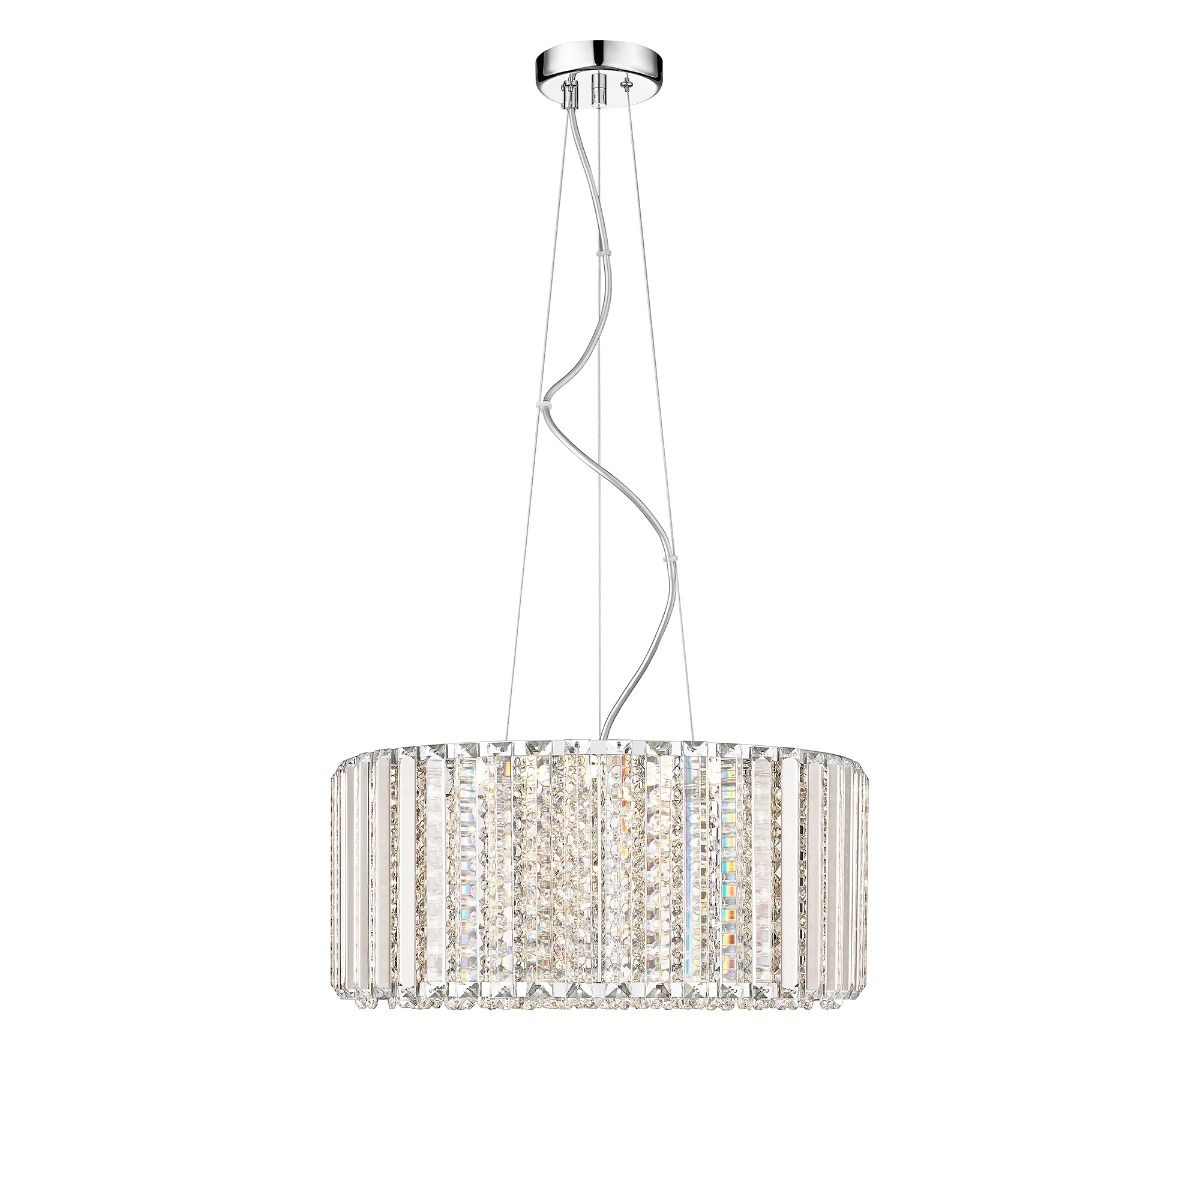 ove-chandelier-rond-patience-del-intégrée-led-integrated-round